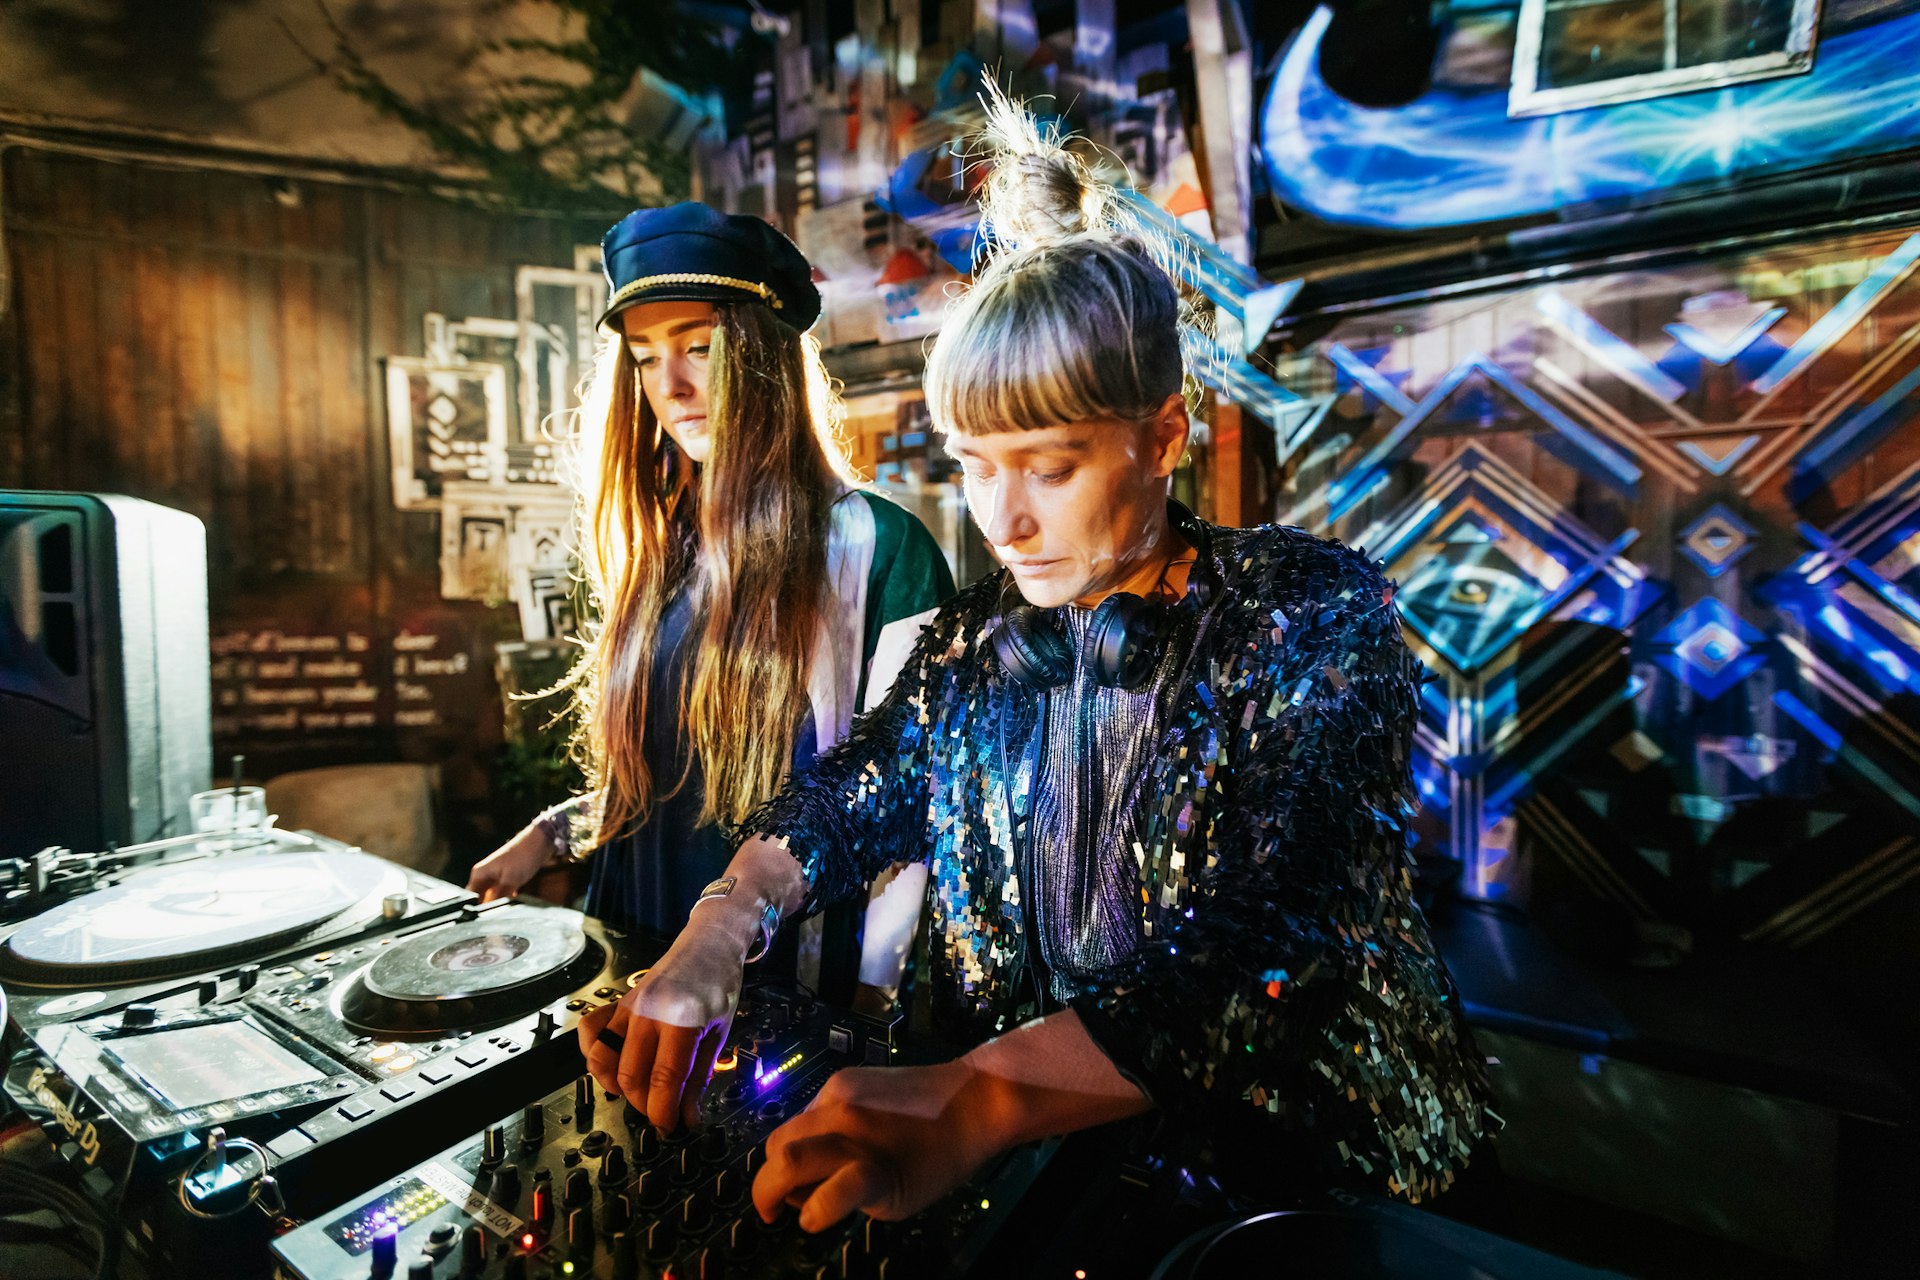 Two stylish DJs performing together late into the night at a colourful open air nightclub in Berlin